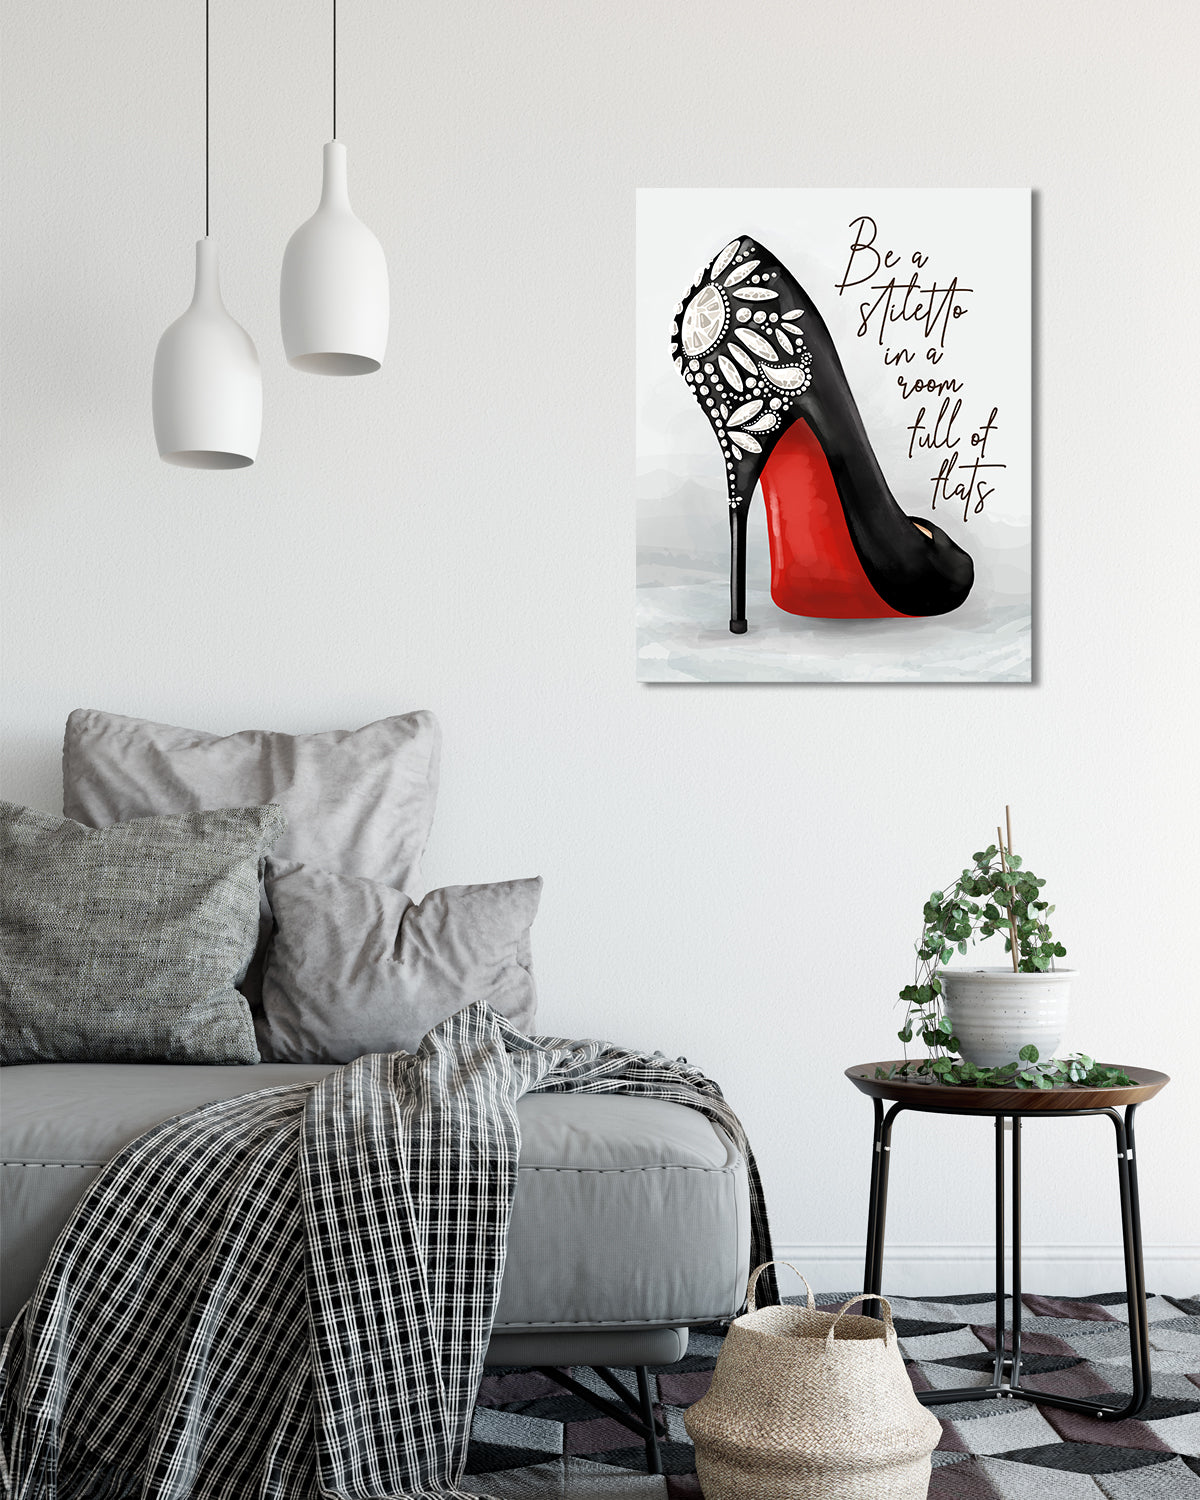 Be A Stiletto In A Room Full Of Flats - Shoes Fashion Quote Wall Decor Art Print on a light gray background - unframed artwork printed on canvas